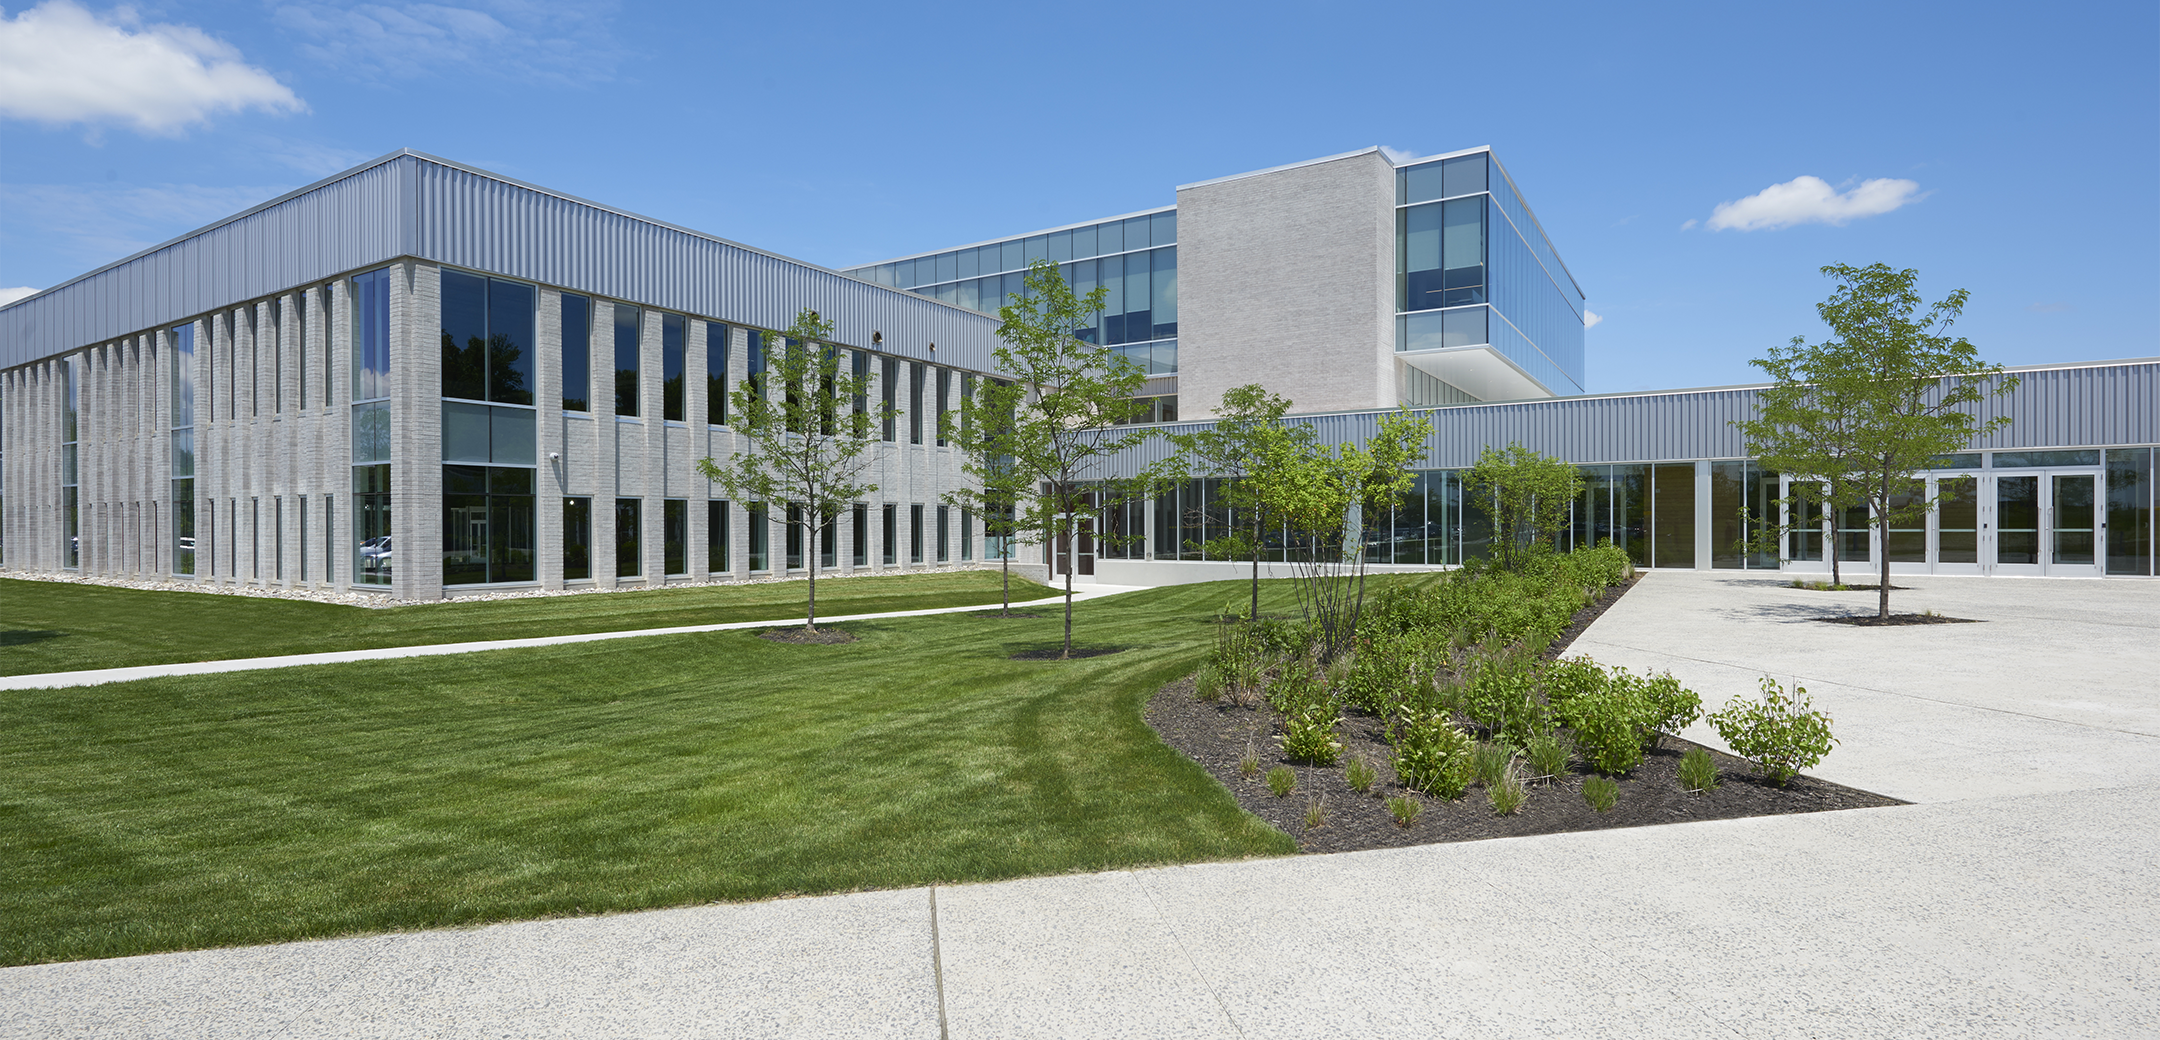 Arborcrest Corporate Campus featuring a two-story, modern, office building with full-height glass cladding and landscaping in the front.